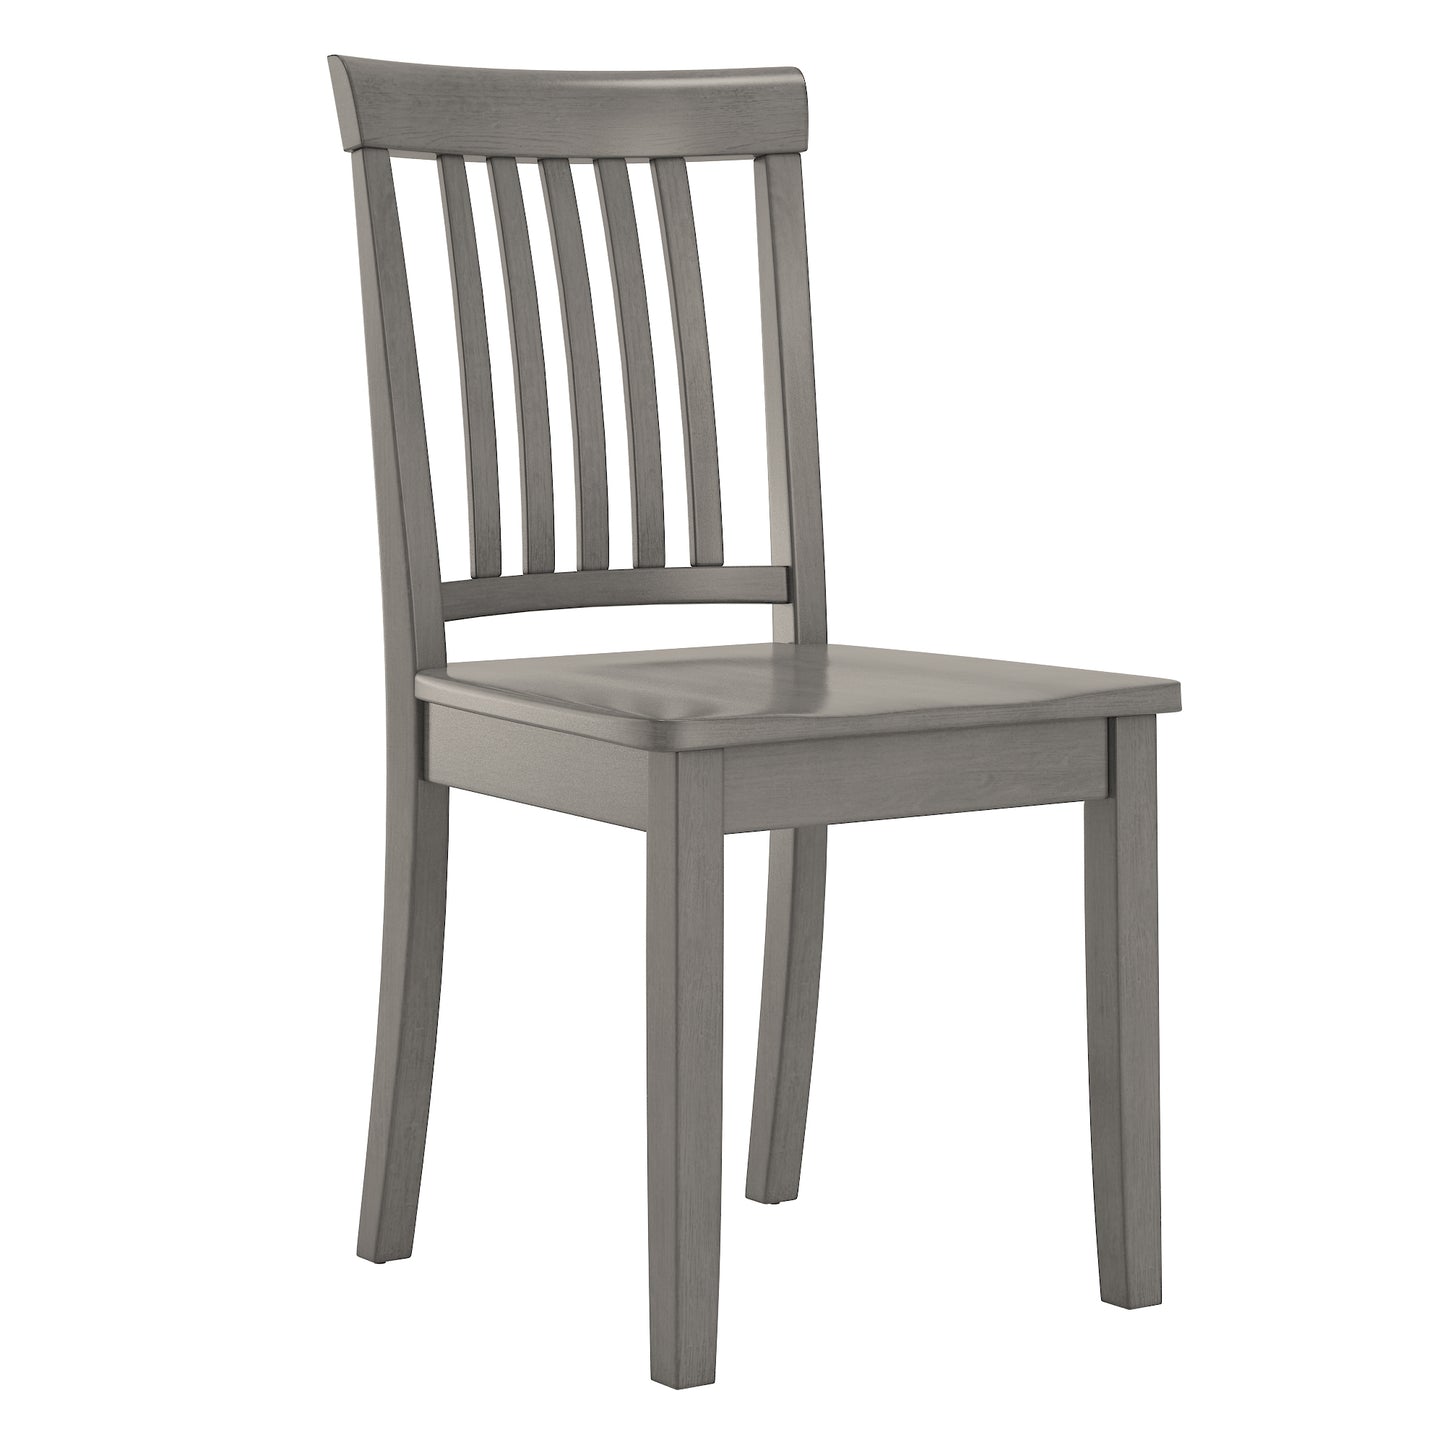 Two-Tone Round 5-Piece Dining Set - Antique Grey Finish, Mission Back Chairs